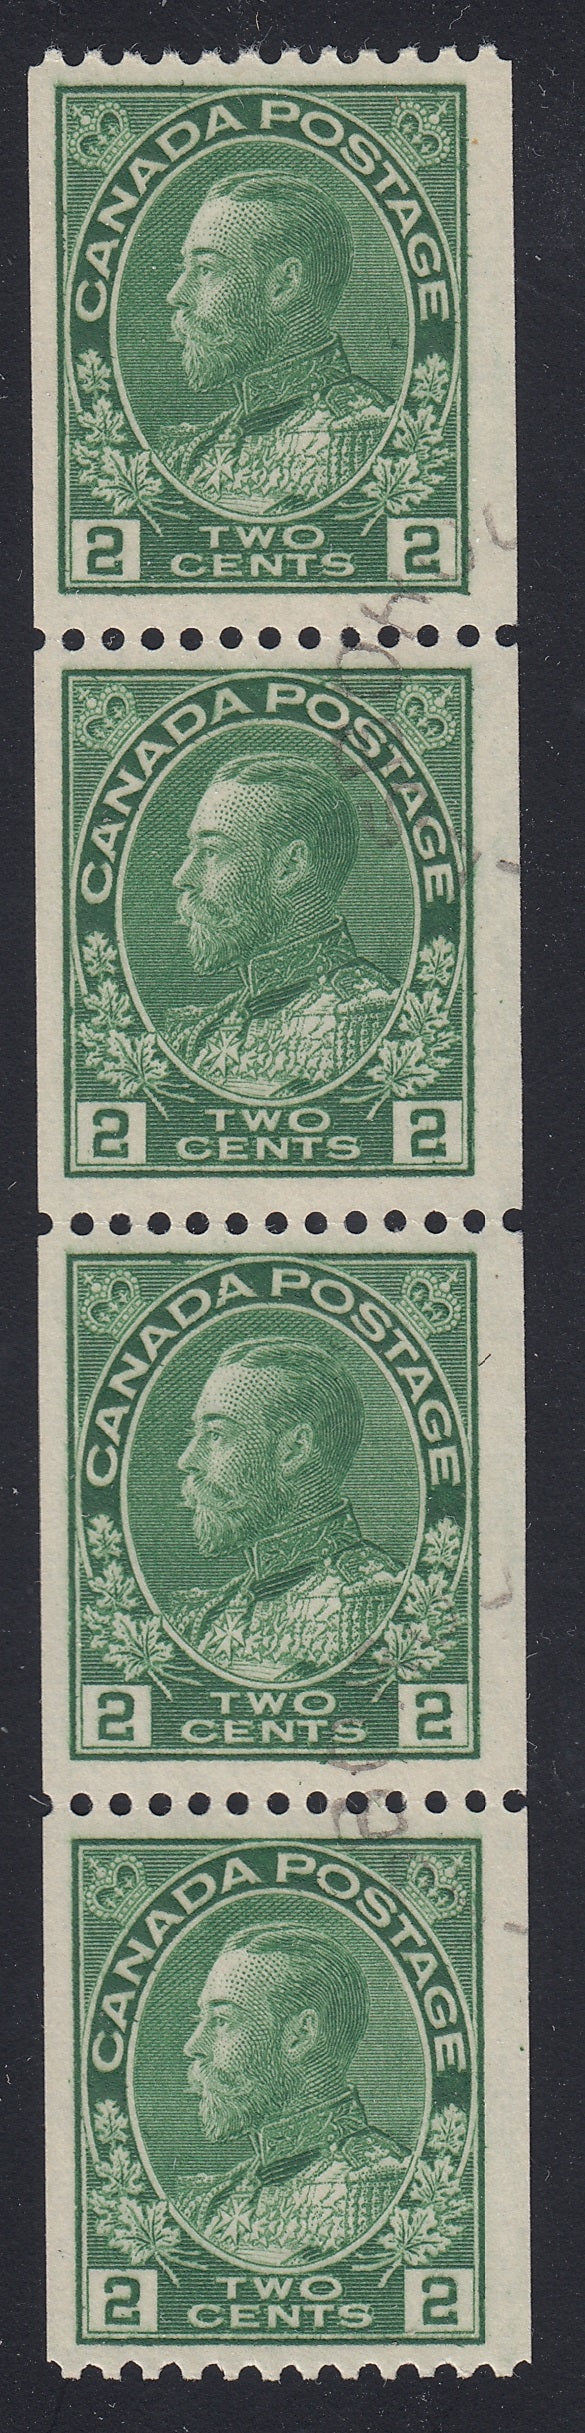 0133CA1711 - Canada #133 Used Strip of 4